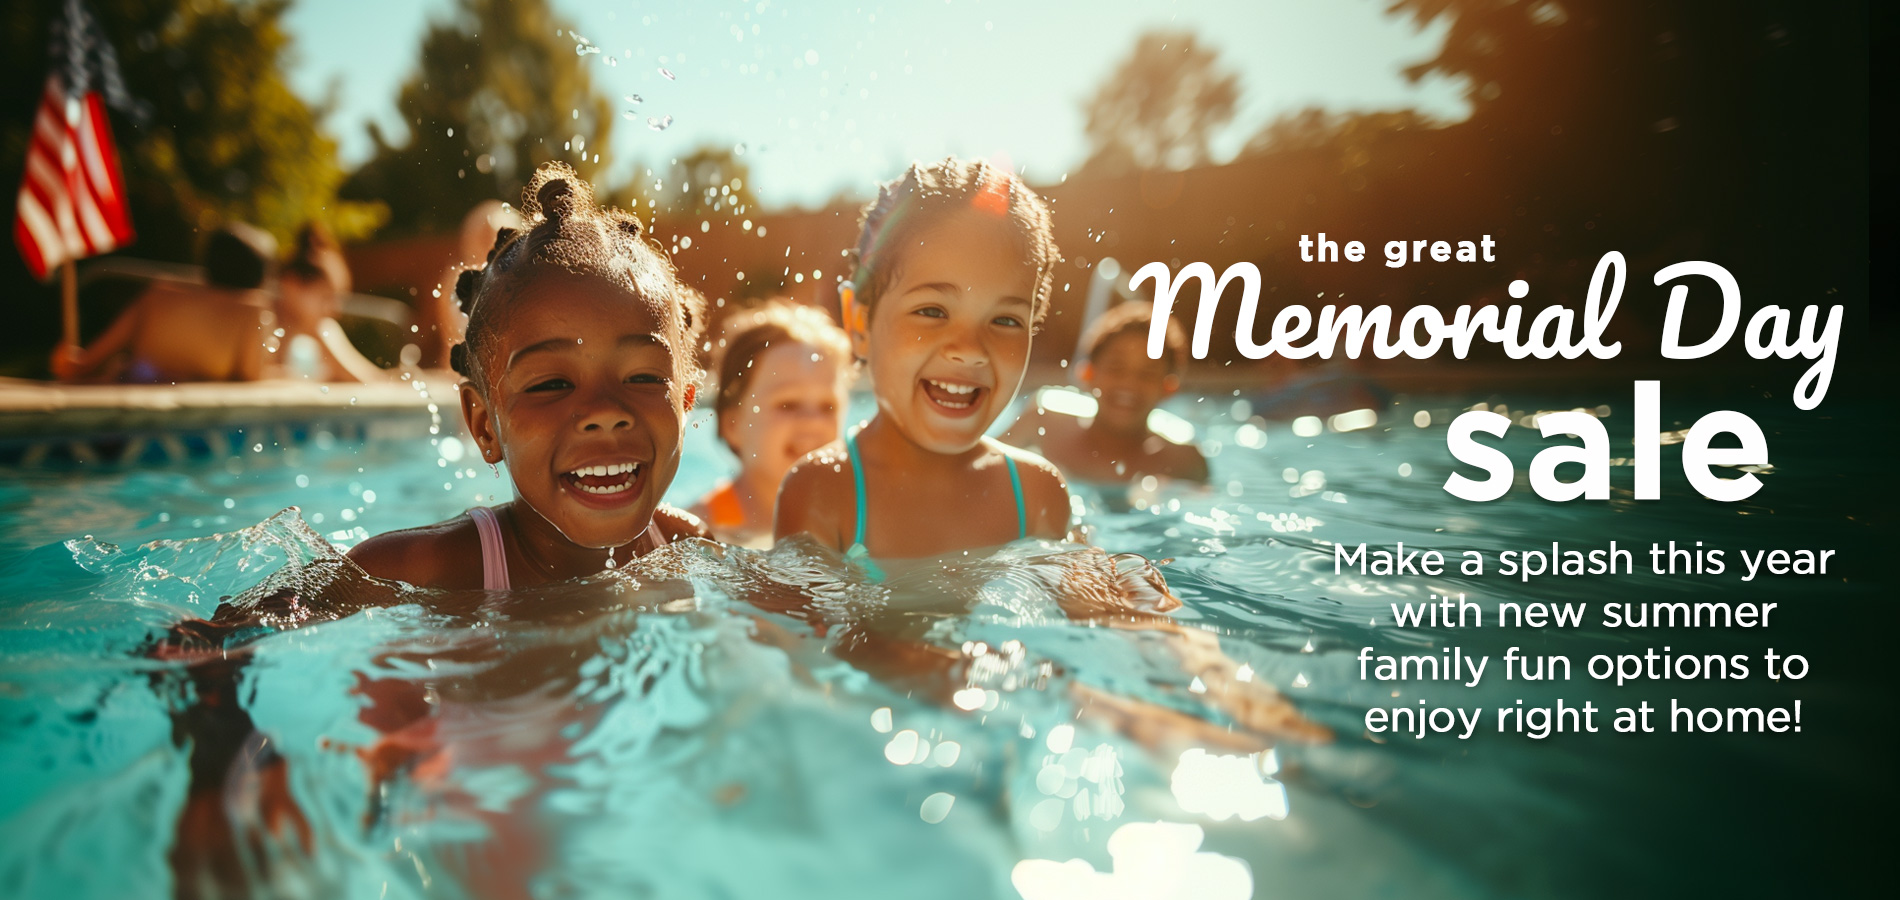 The Great Memorial Day Sale is On NOW! Make a splash this year with new summer family fun options to enjoy right at home!